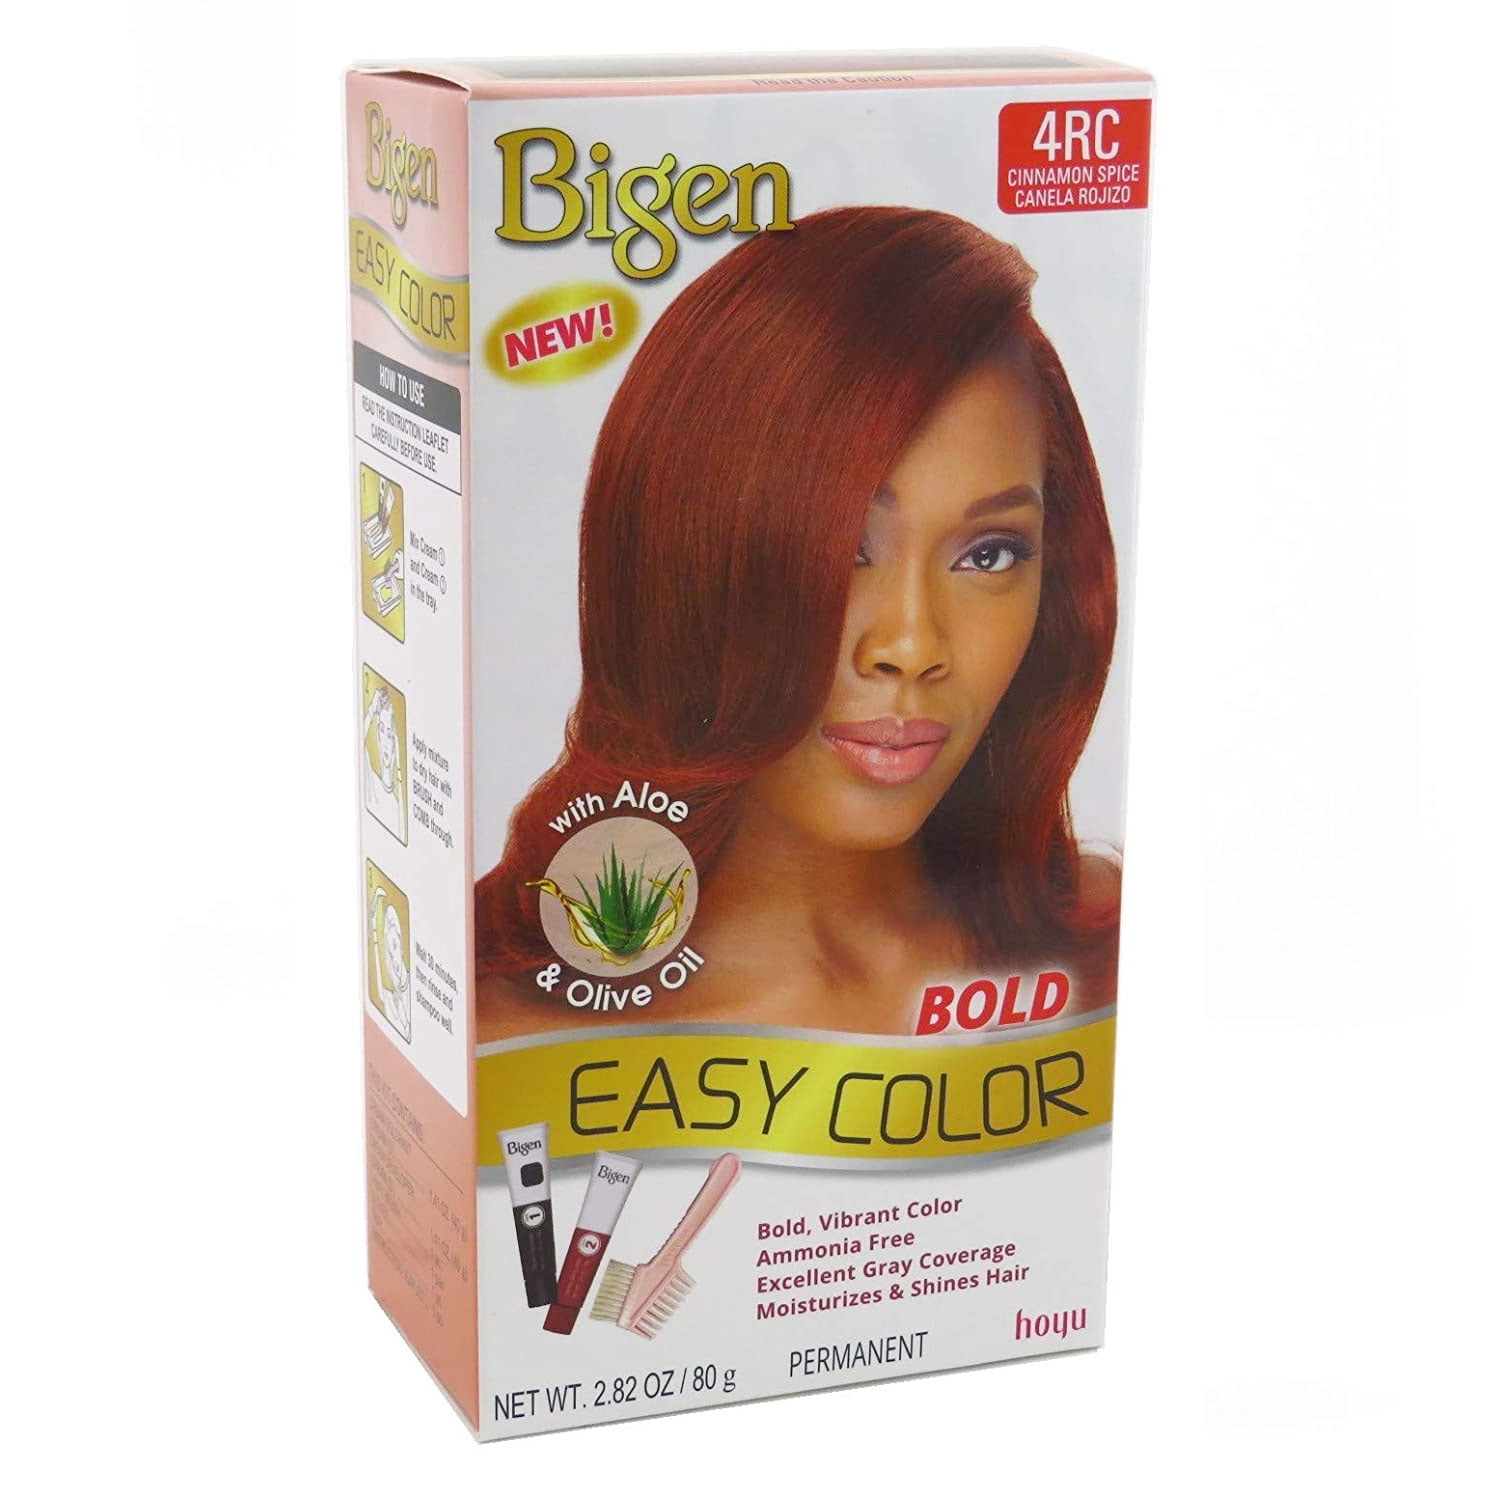 Bigen Permanent Easy Hair Color for Women Bold Shades, 4RC Cinnamon Spice,   Oz.,12 packs 